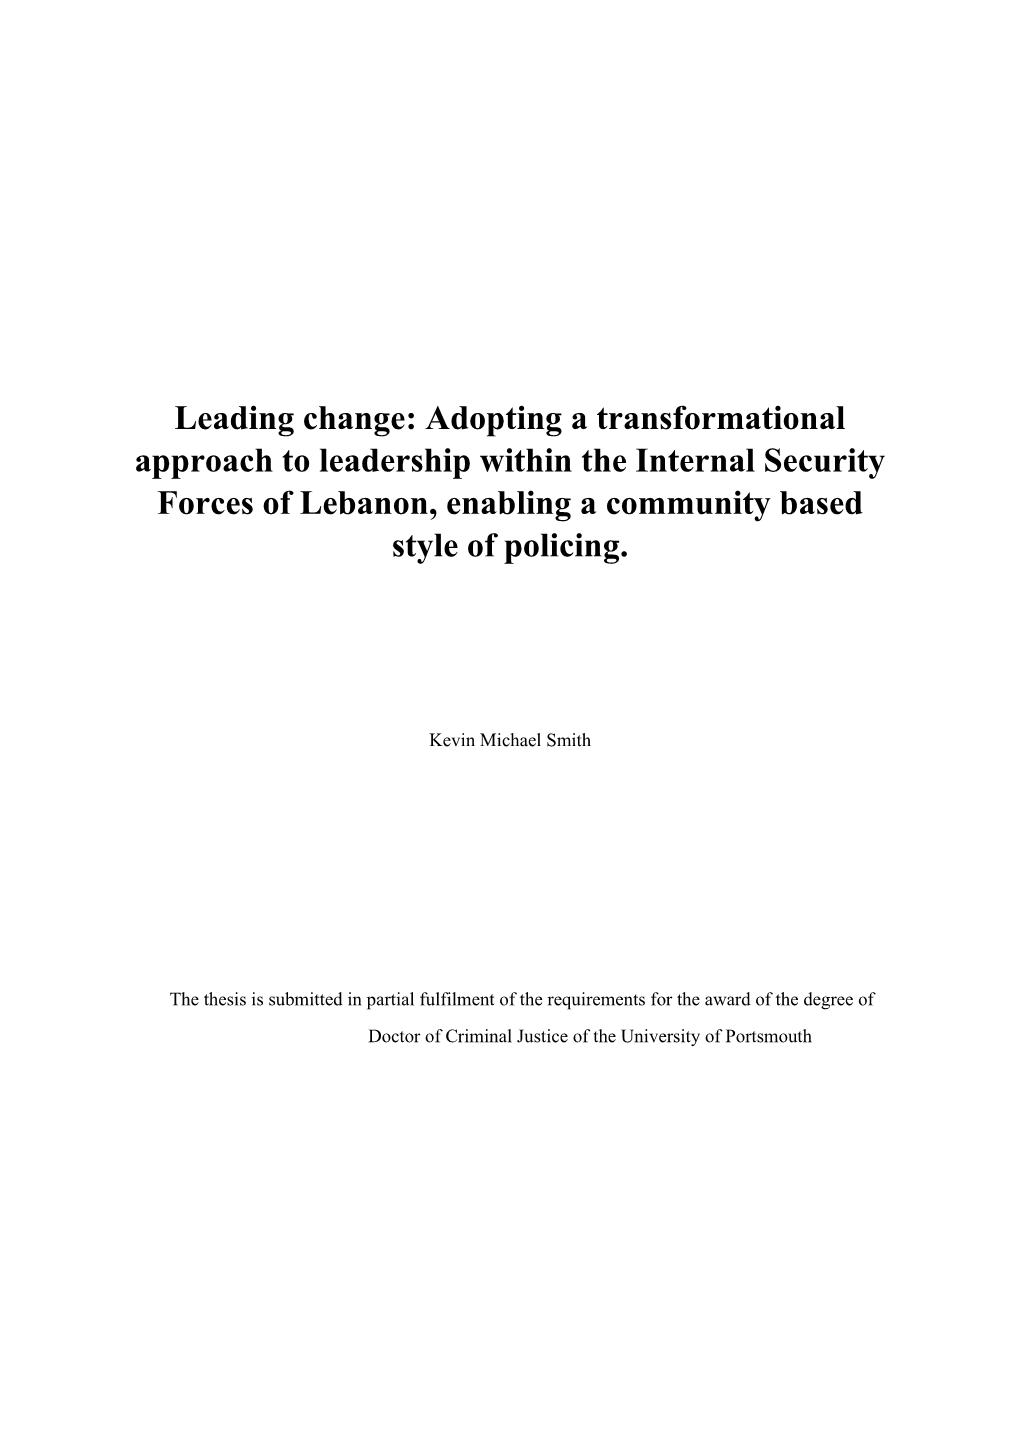 Leading Change: Adopting a Transformational Approach to Leadership Within the Internal Security Forces of Lebanon, Enabling a Community Based Style of Policing